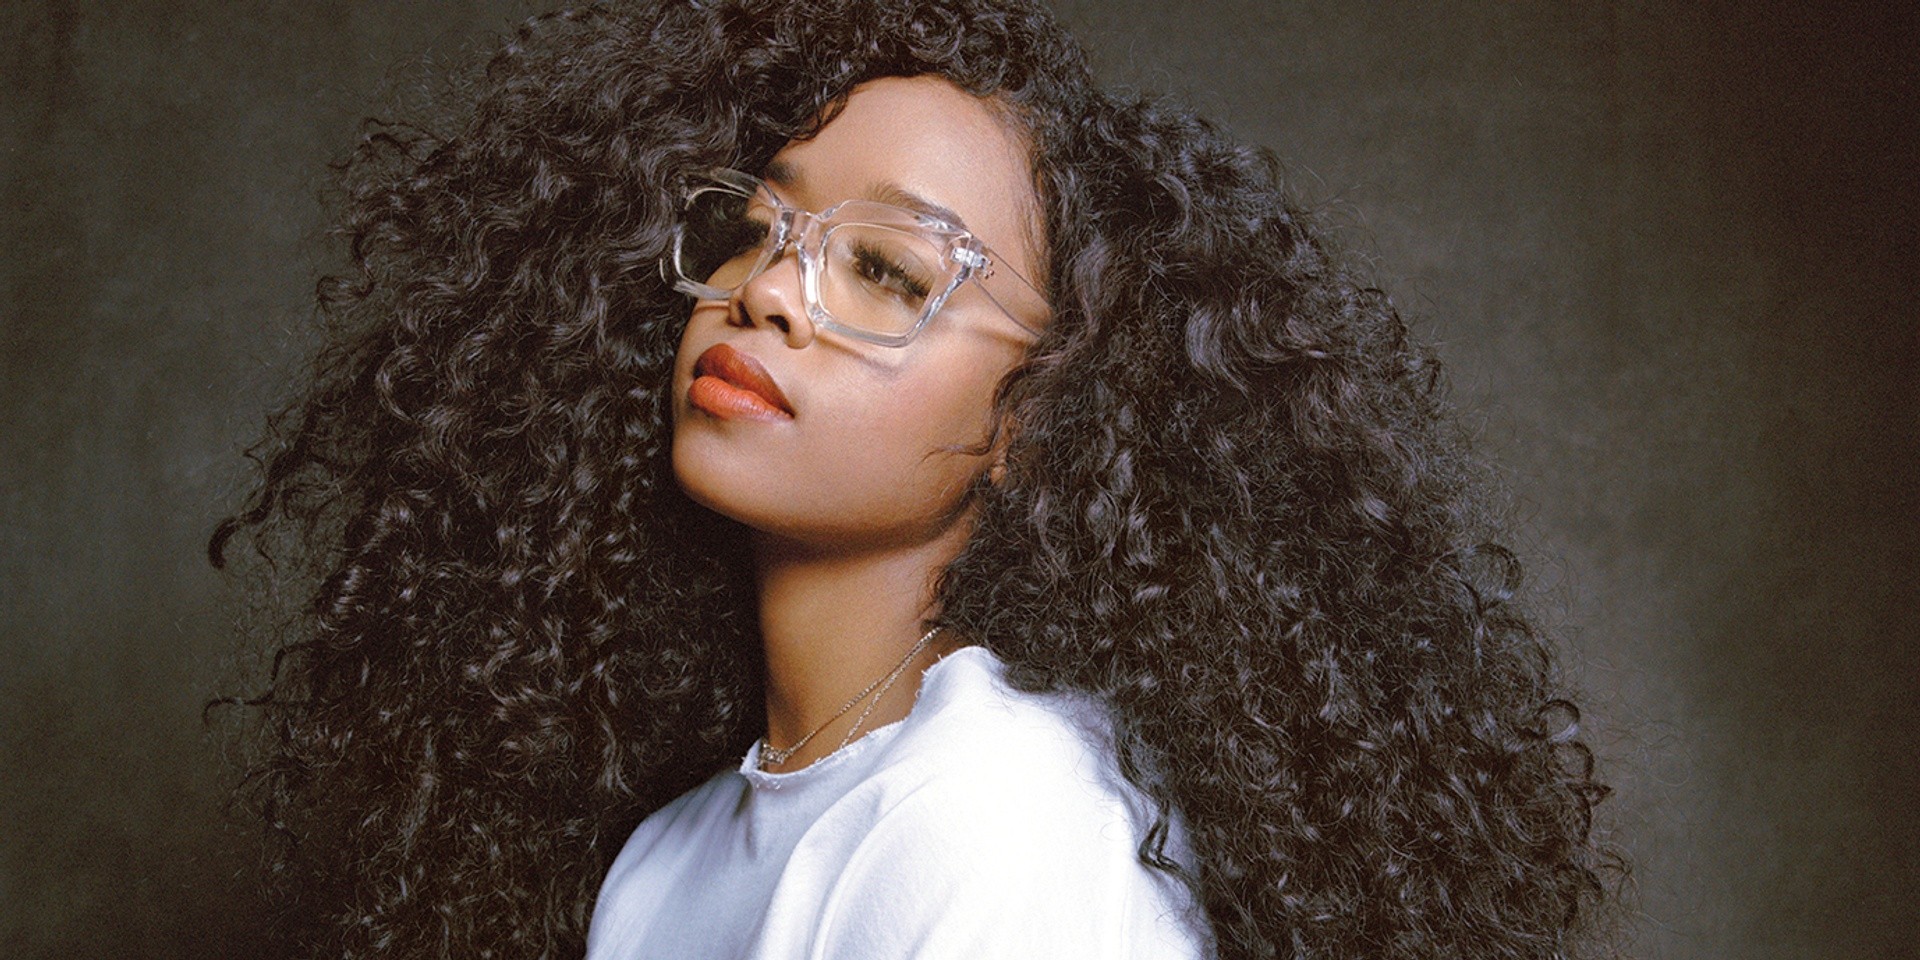 H.E.R gives "shoutout to my Filipinos" following her GRAMMY wins